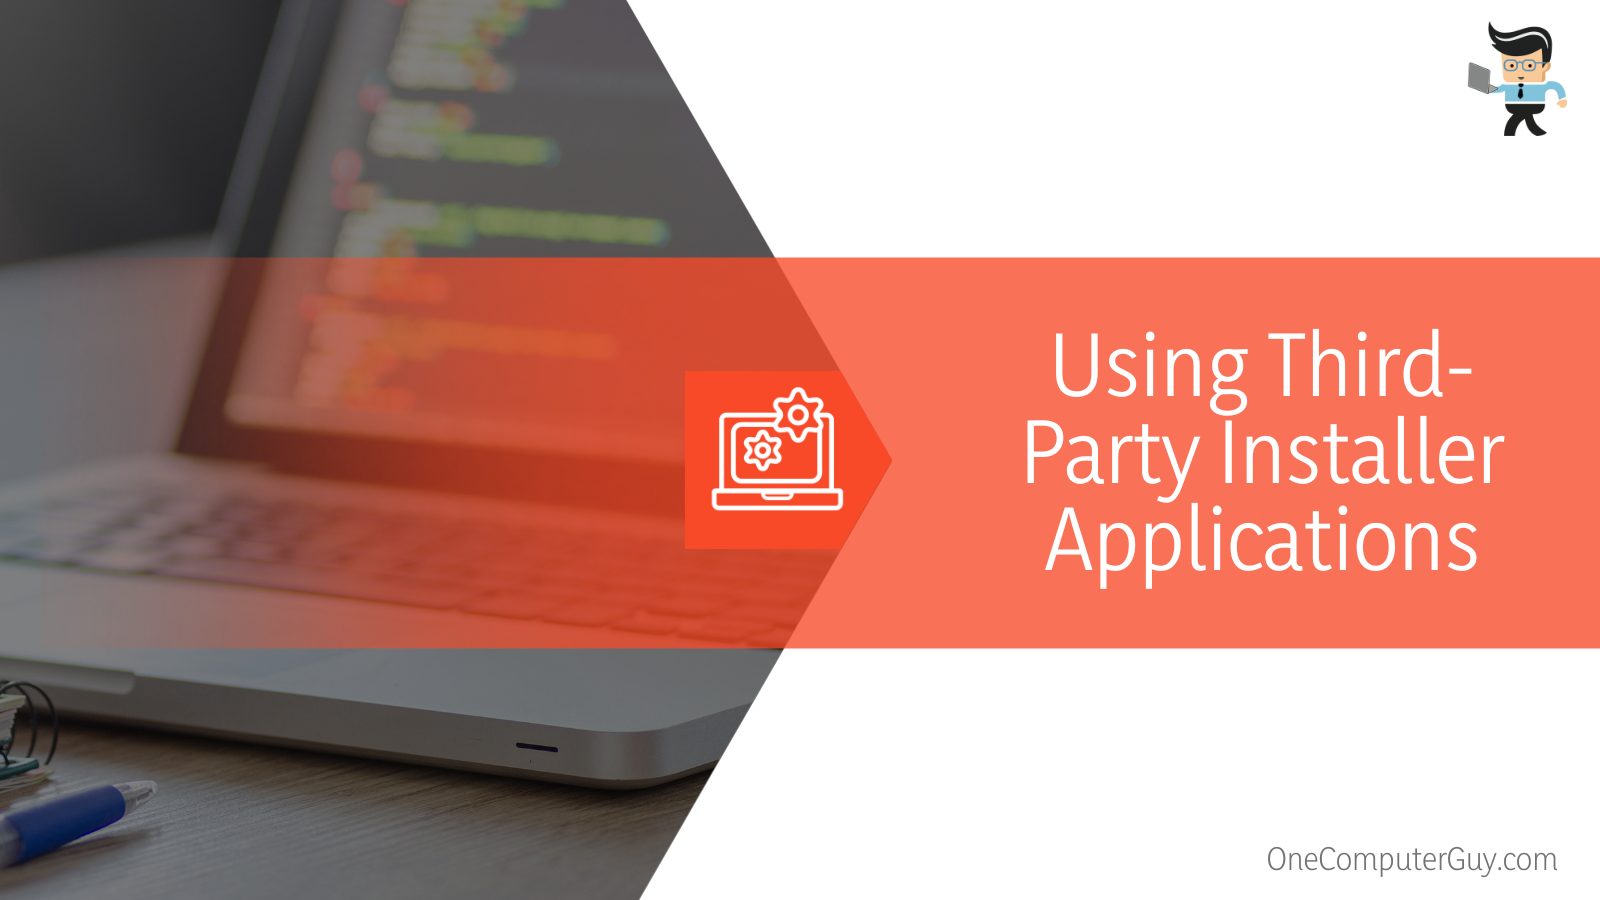 Using Third-Party Installer Applications